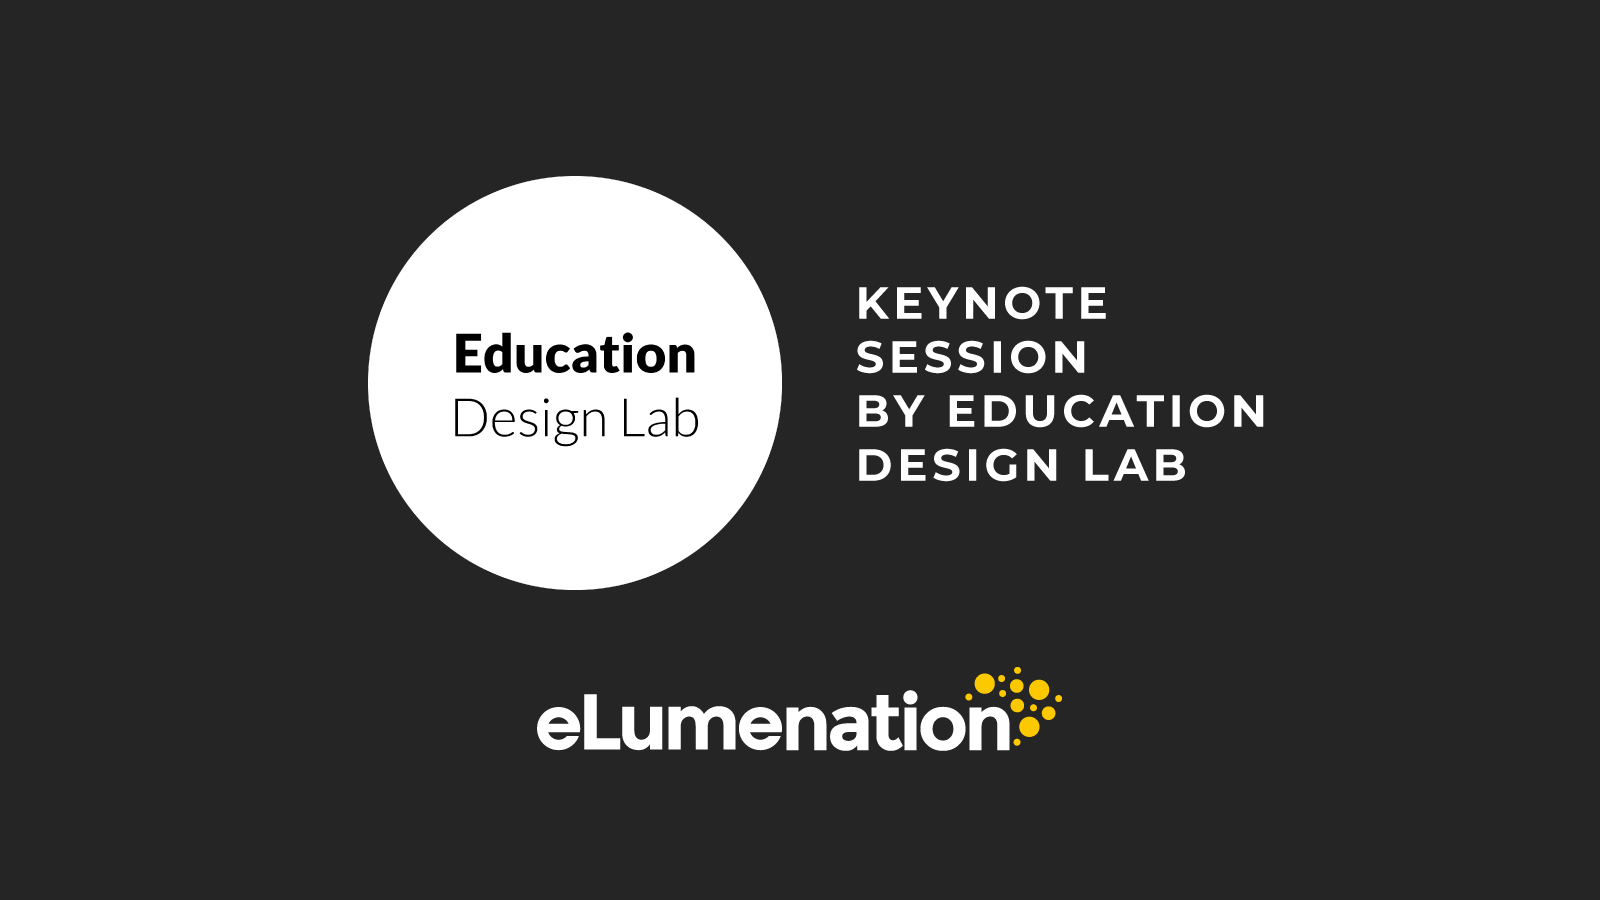 Designing Learning to Work: The Shift to a Skills-Based Talent Economy | Education Design Lab at eLumenation